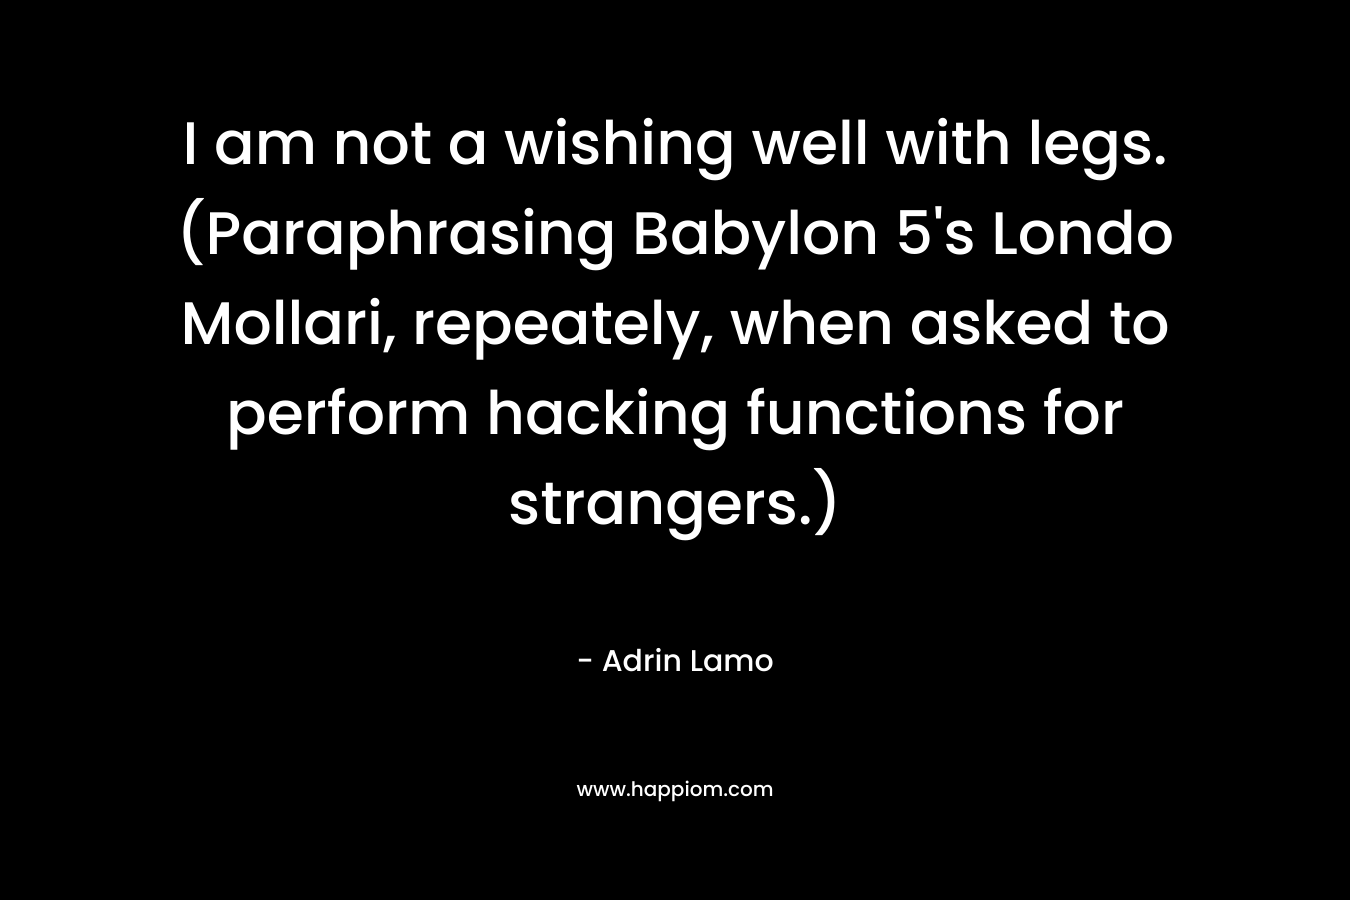 I am not a wishing well with legs. (Paraphrasing Babylon 5’s Londo Mollari, repeately, when asked to perform hacking functions for strangers.) – Adrin Lamo